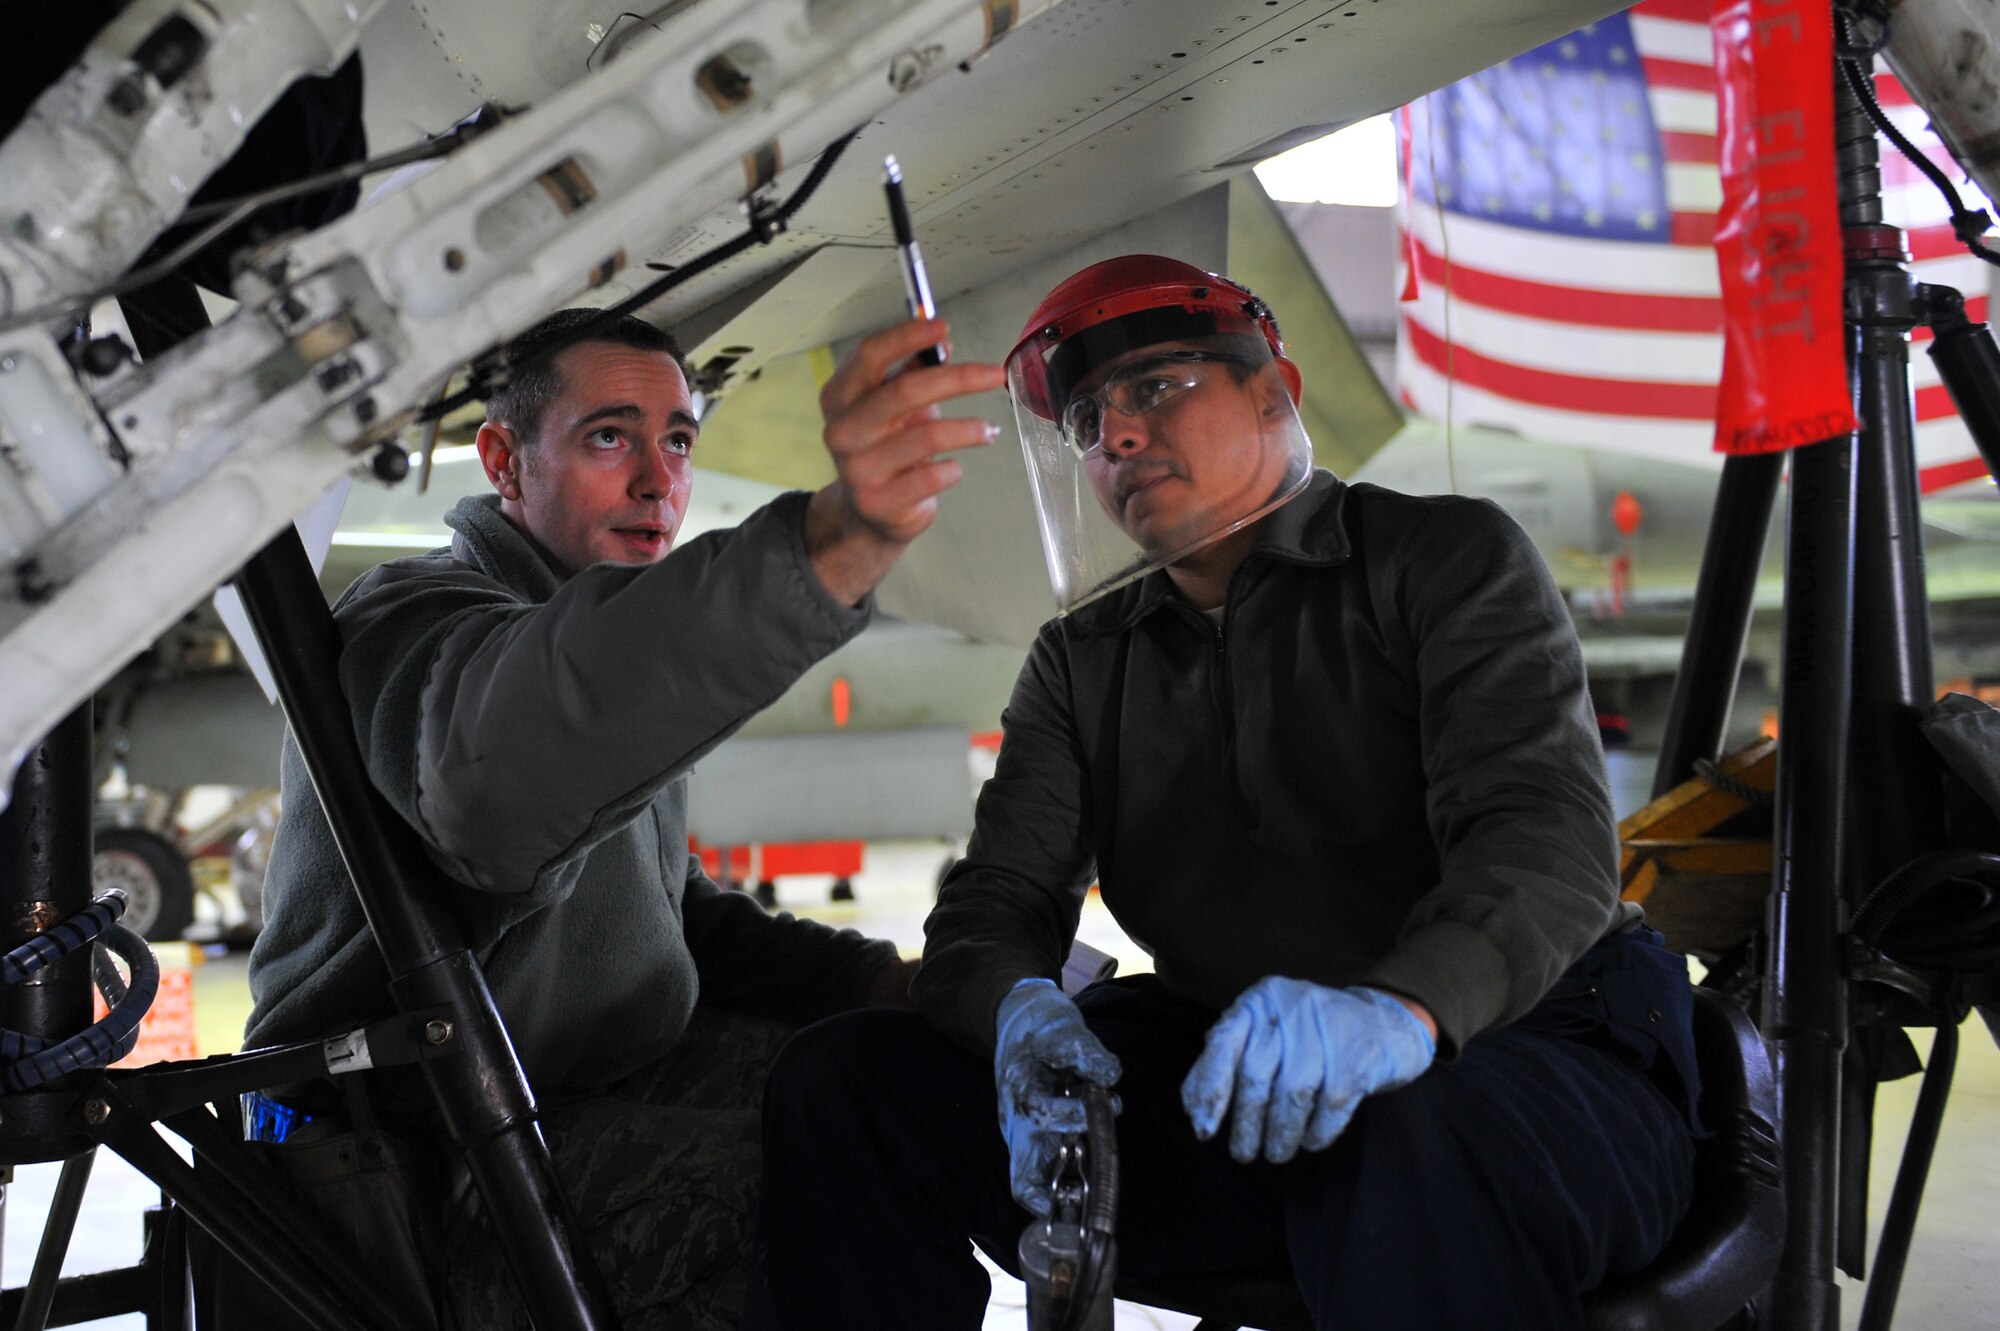 SPANGDAHLEM AIR BASE, Germany – Staff Sgt. Michael Selfridge, left, 52nd Maintenance Operations Squadron aircraft maintenance inspector, inspects Airman 1st Class Ramiro Gamero’s, 480th Fighter Squadron crew chief, work during an F-16 Fighting Falcon landing gear maintenance inspection inside Hangar 2 here March 8. The AMXS quality assurance section is made up of eight certified maintenance inspectors who inspect 81st and 480th Fighter Squadron aircraft maintenance processes. Quality assurance modernizes the Air Force’s aircraft maintenance and training by tracking maintenance performance against metrics to improve efficiency, production, and reliability.  (U.S. Air Force photo by Airman 1st Class Dillon Davis/Released)